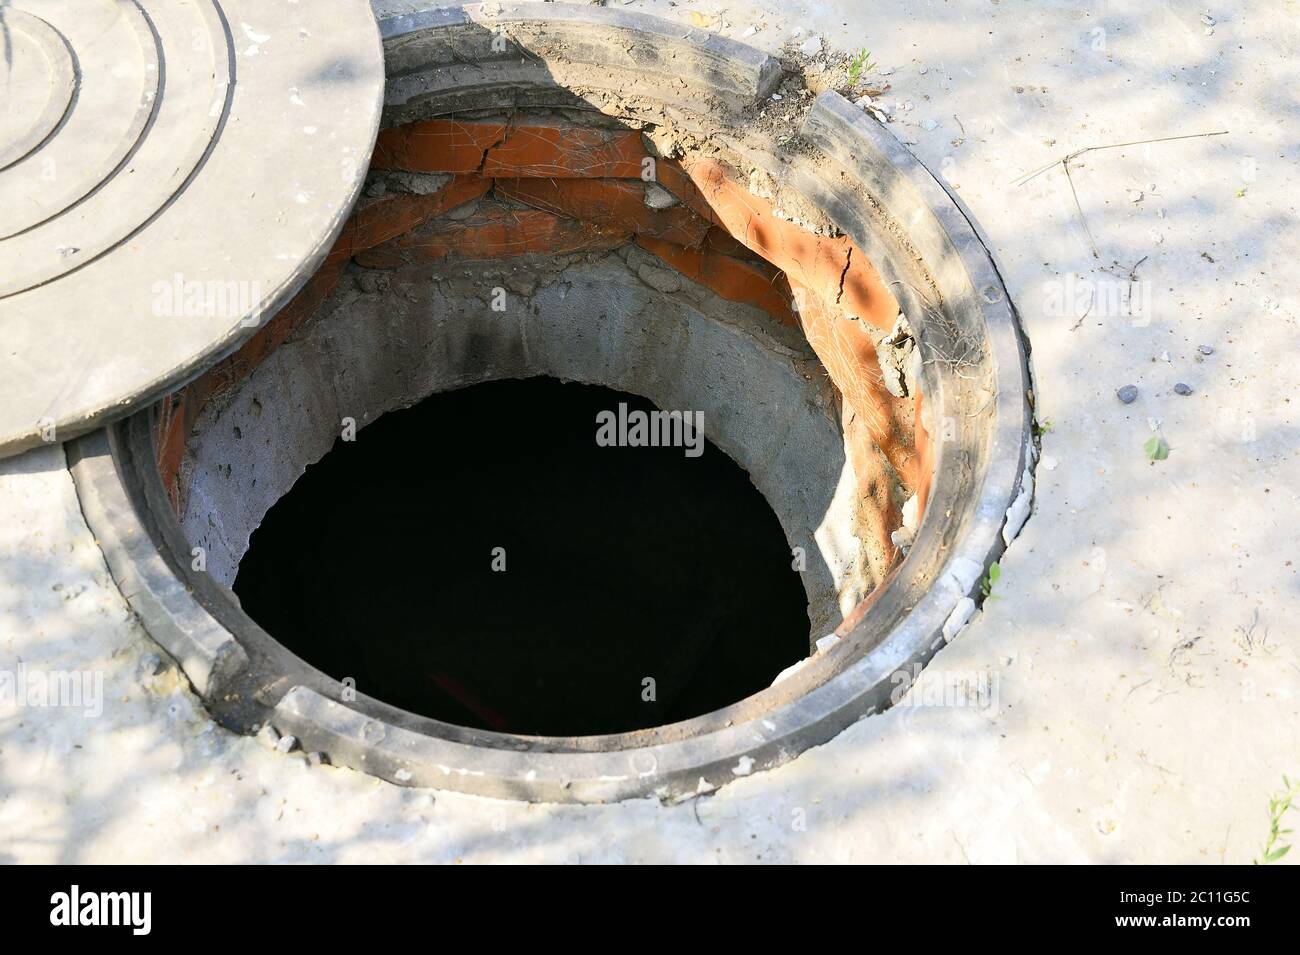 Concrete cesspit with an open hatch on the ground in the summer Stock Photo